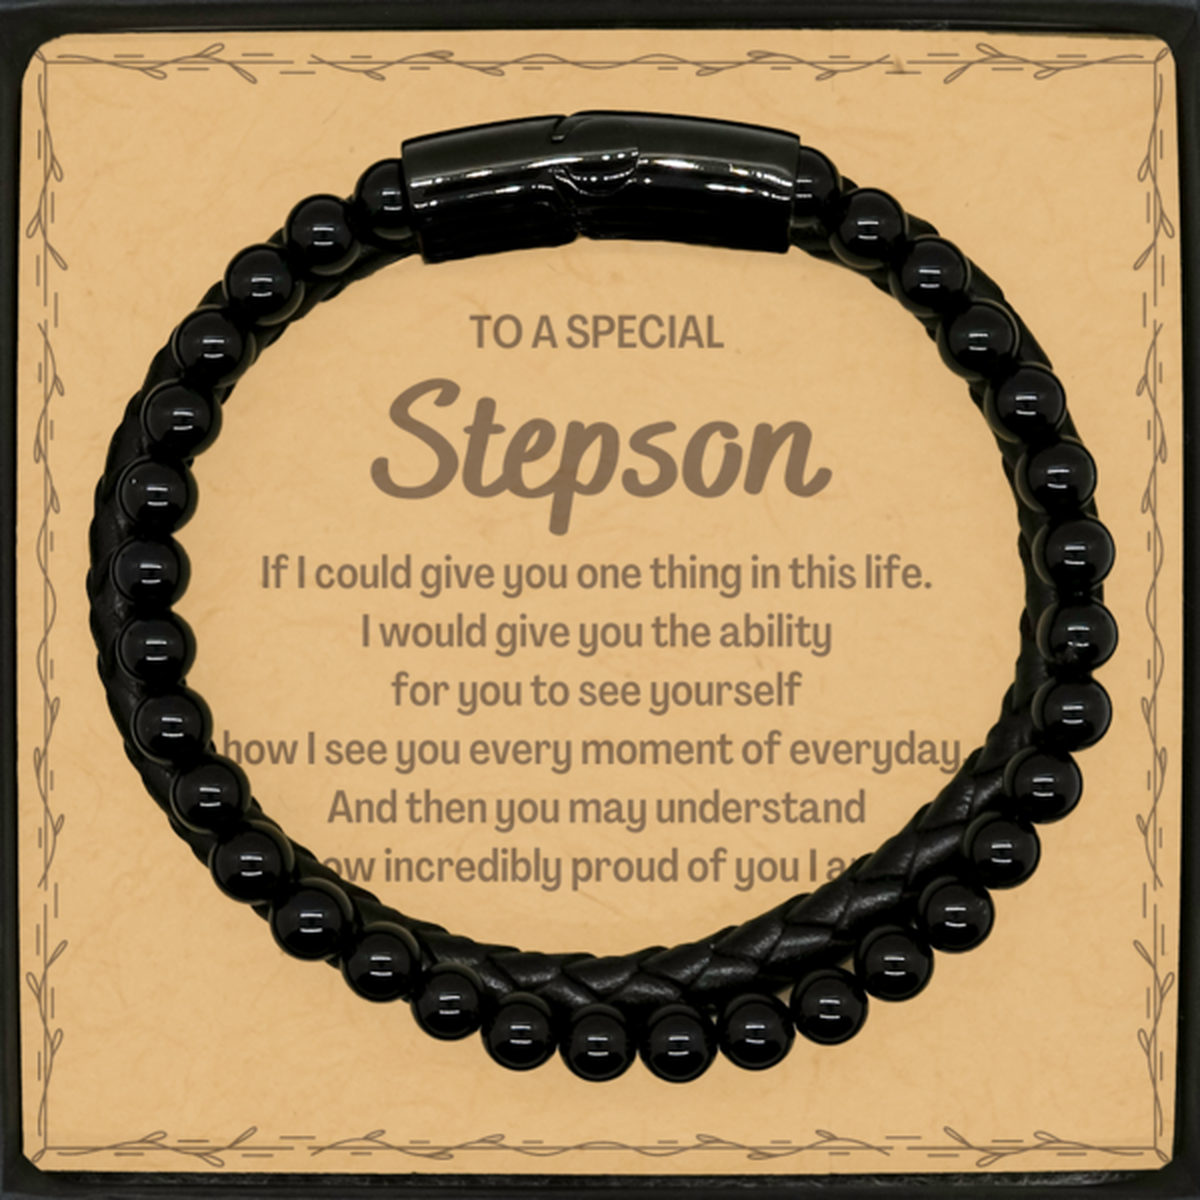 To My Stepson Stone Leather Bracelets, Gifts For Stepson Message Card, Inspirational Gifts for Christmas Birthday, Epic Gifts for Stepson To A Special Stepson how incredibly proud of you I am